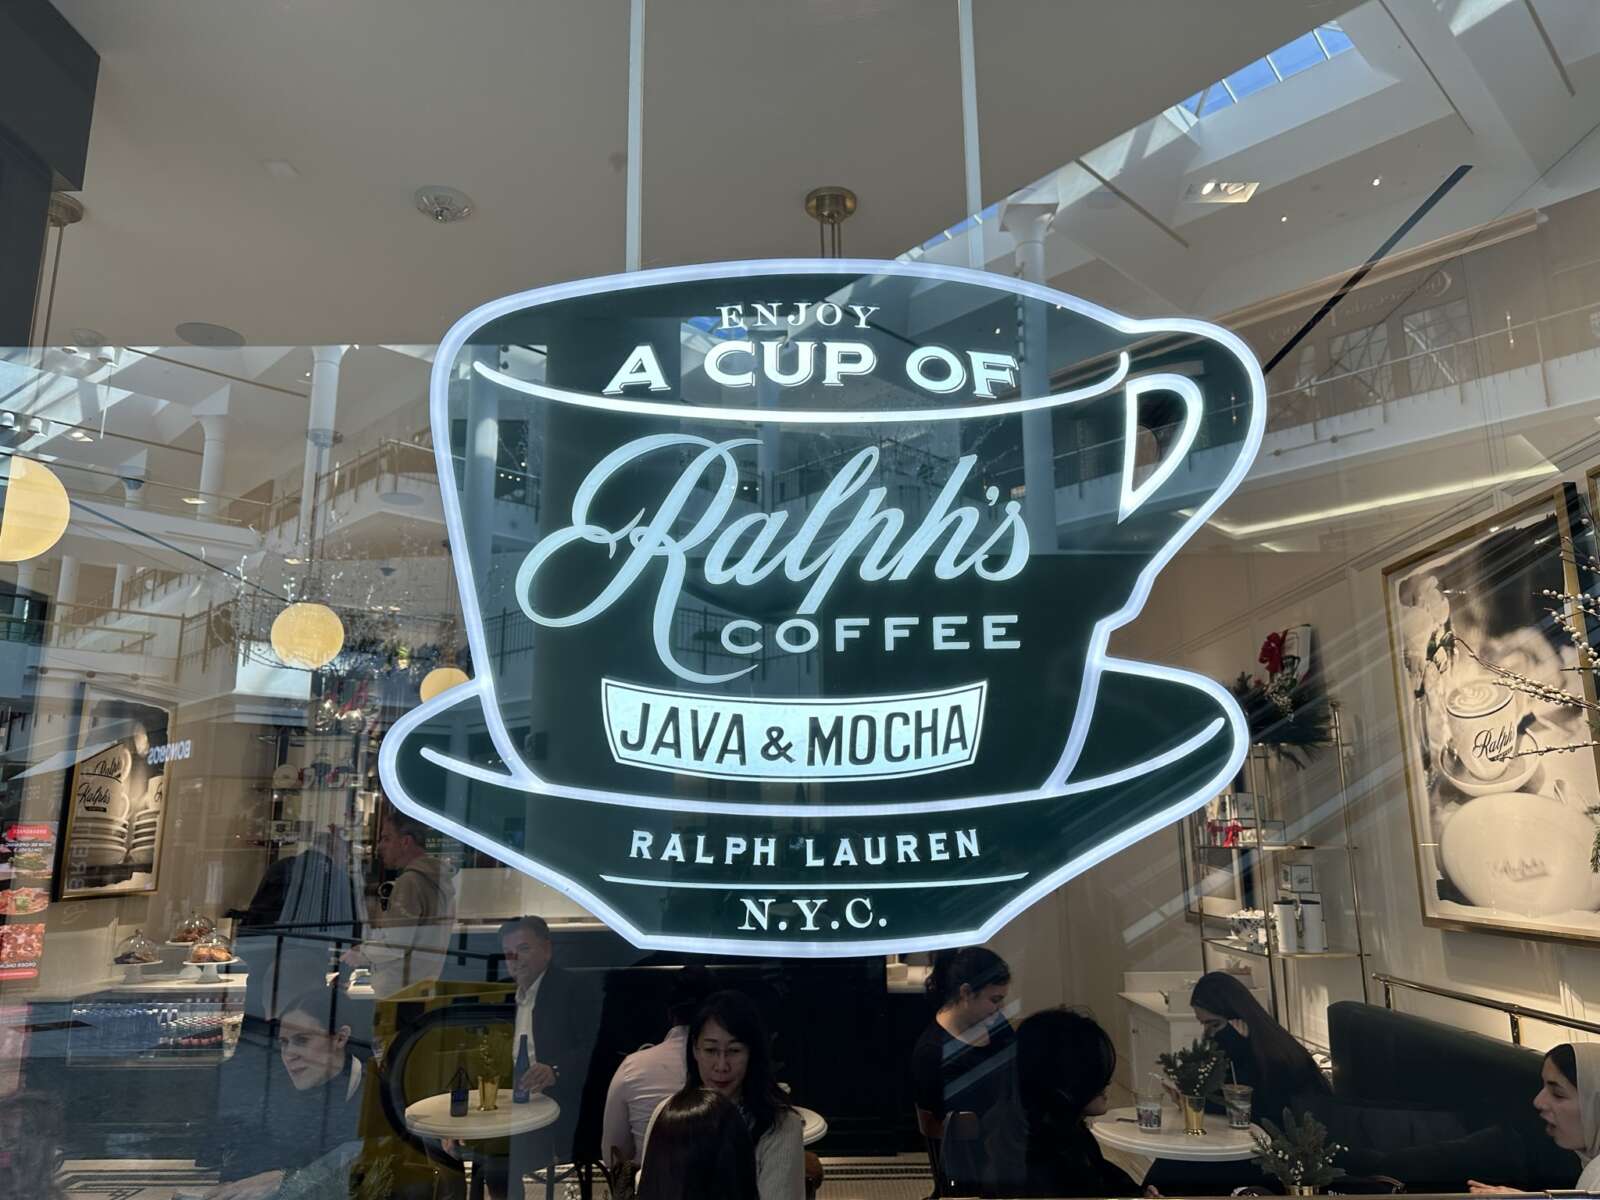 Coffee shop from fashion brand Ralph Lauren opens at Tysons Galleria